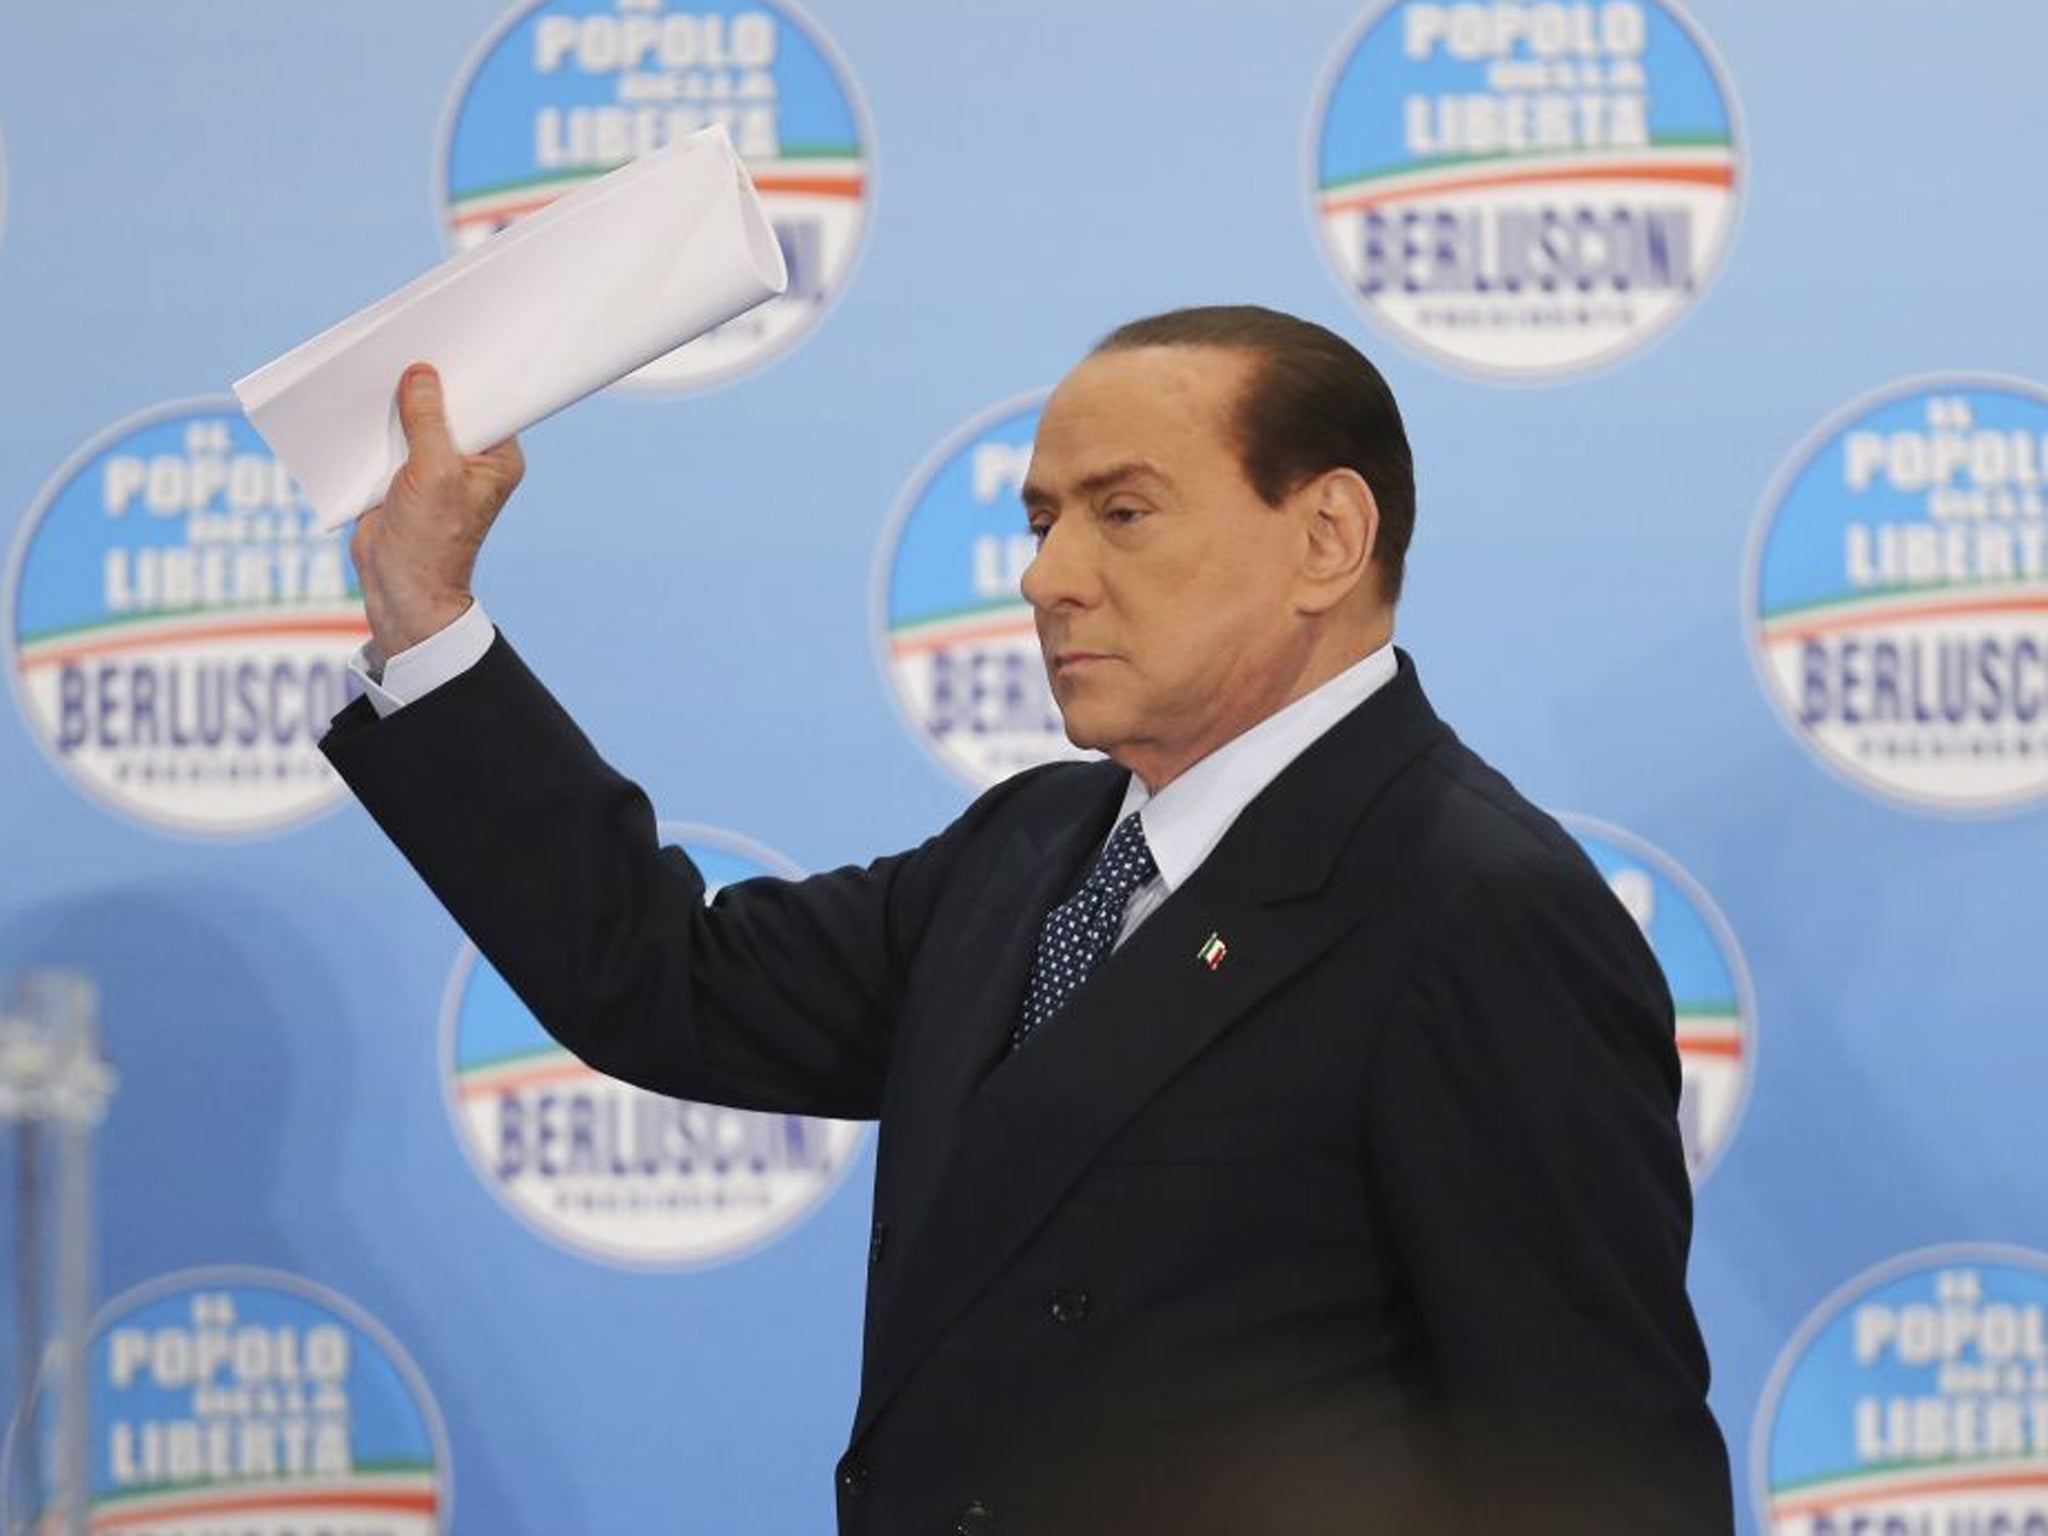 Former Italian Premier Silvio Berlusconi had been promising for several days to make a 'shock proposal'